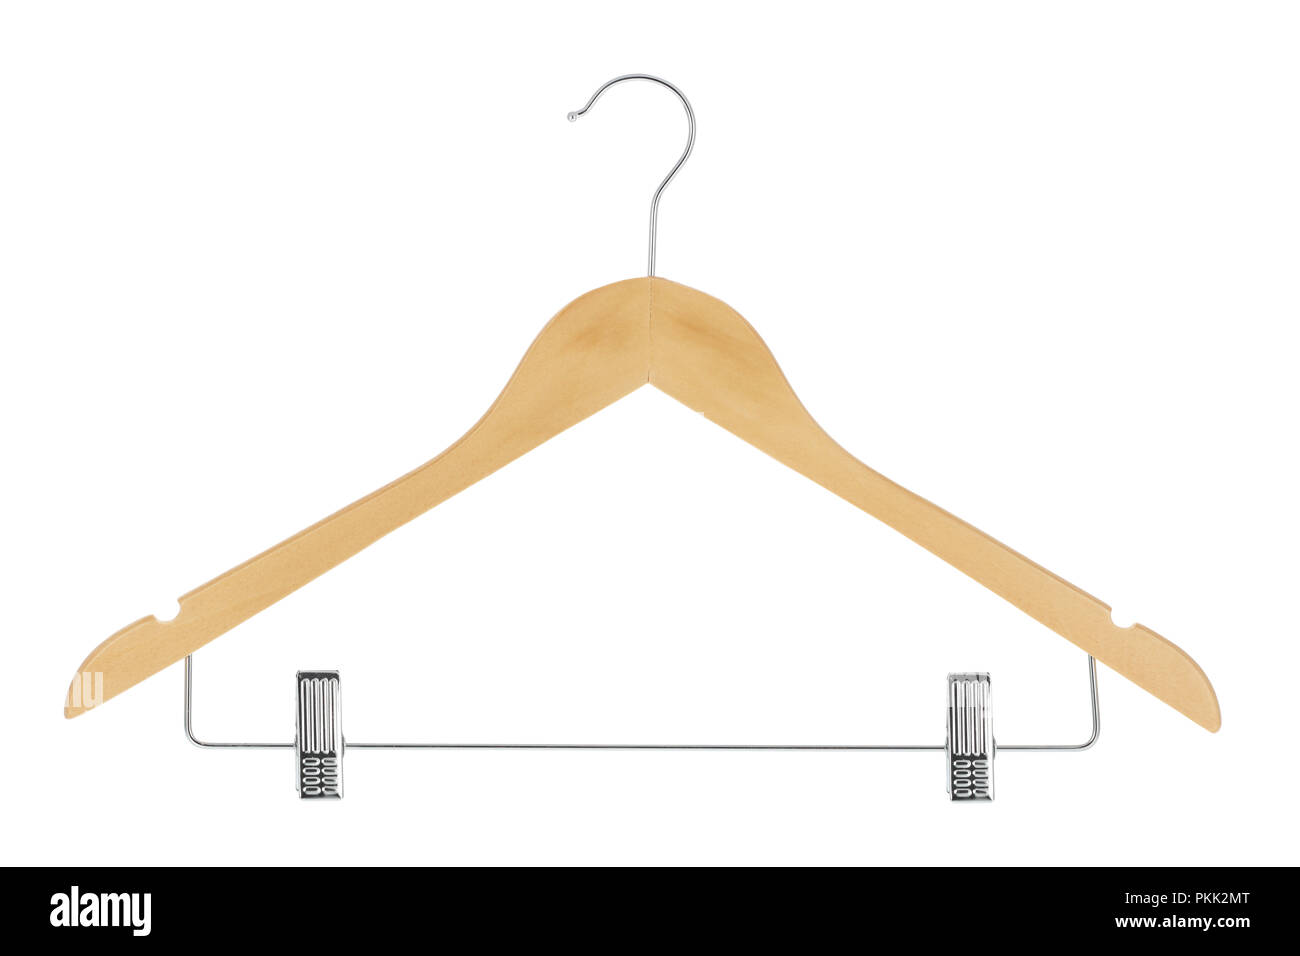 Wood clothes hanger with metal pants / skirt hanger isolated on a white background Stock Photo